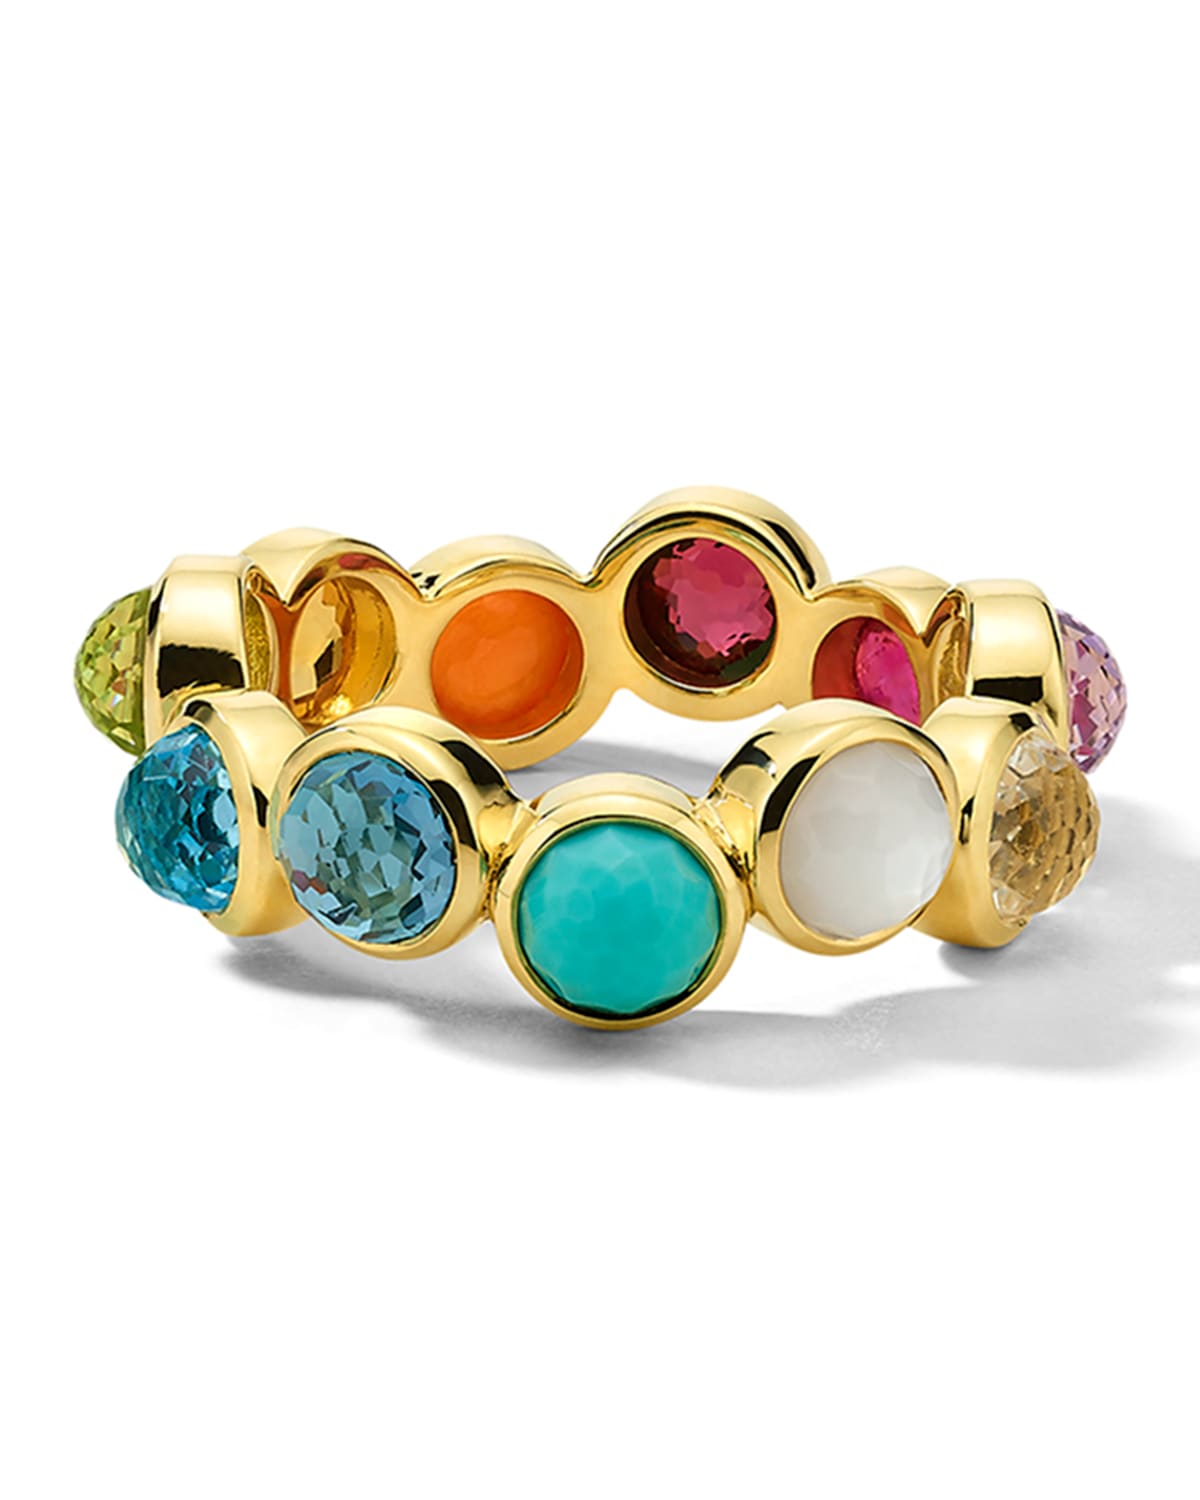 All-Stone Ring in 18K Gold